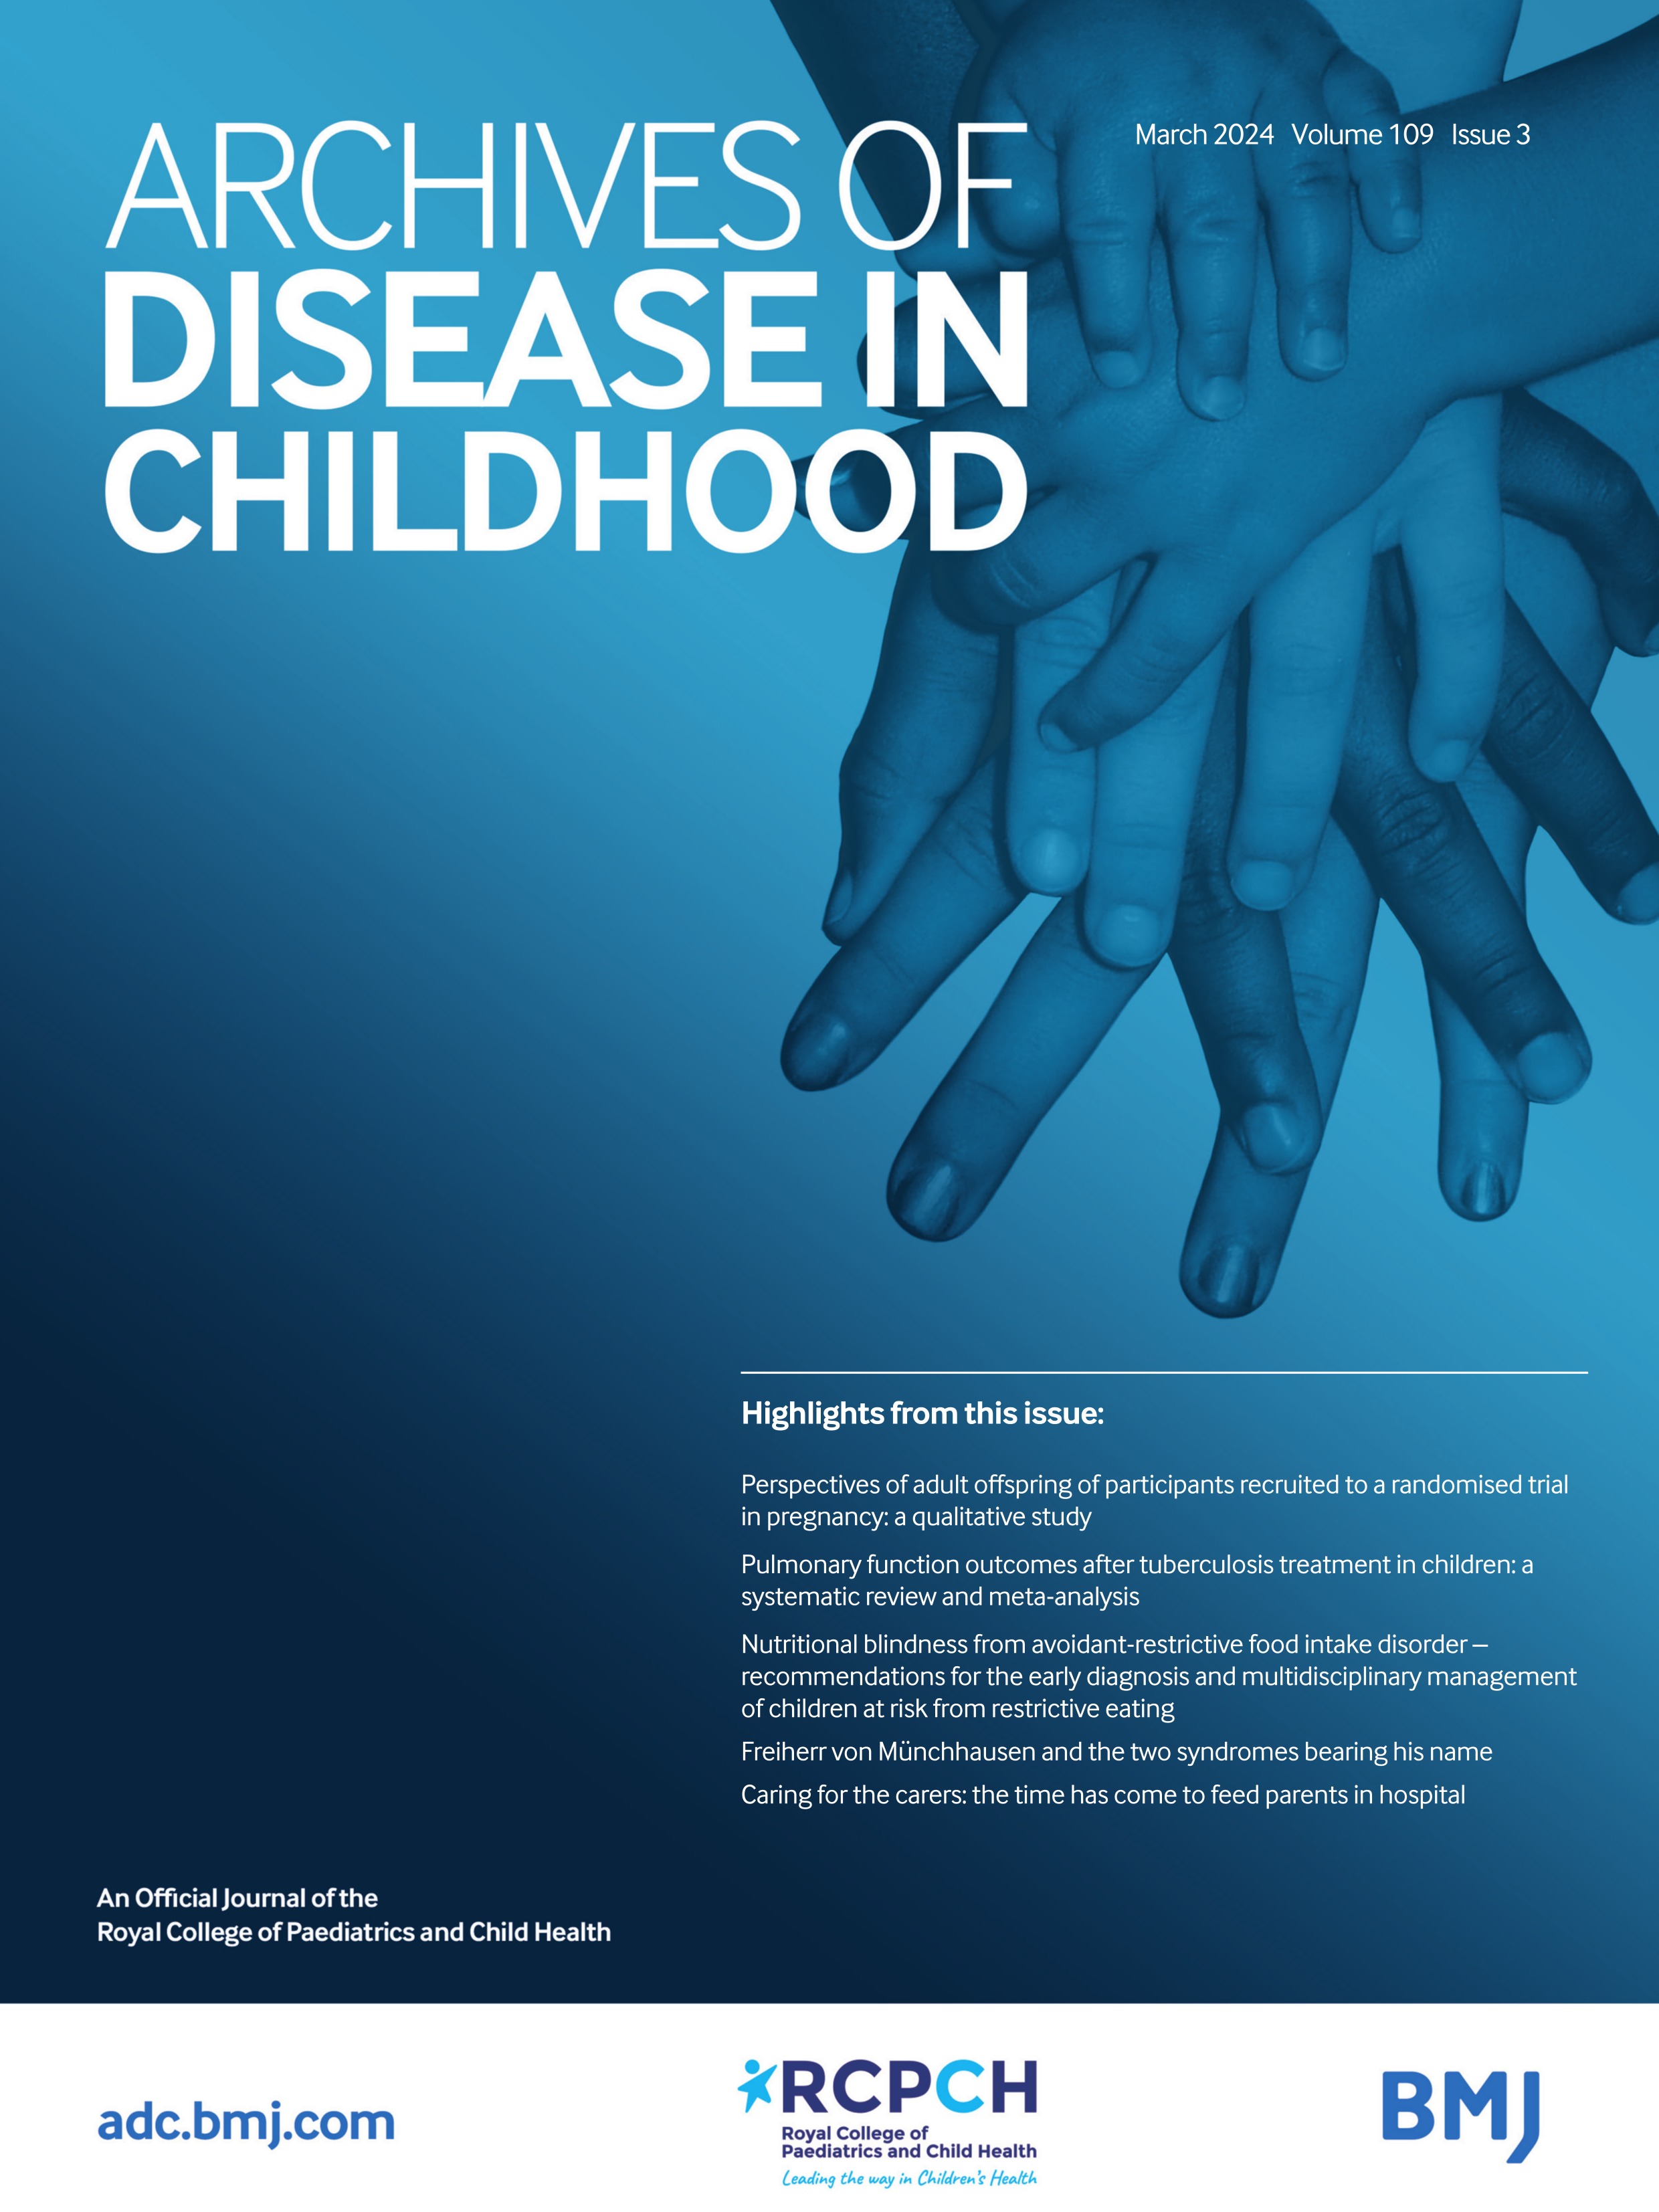 Child mask mandates for COVID-19: a systematic review